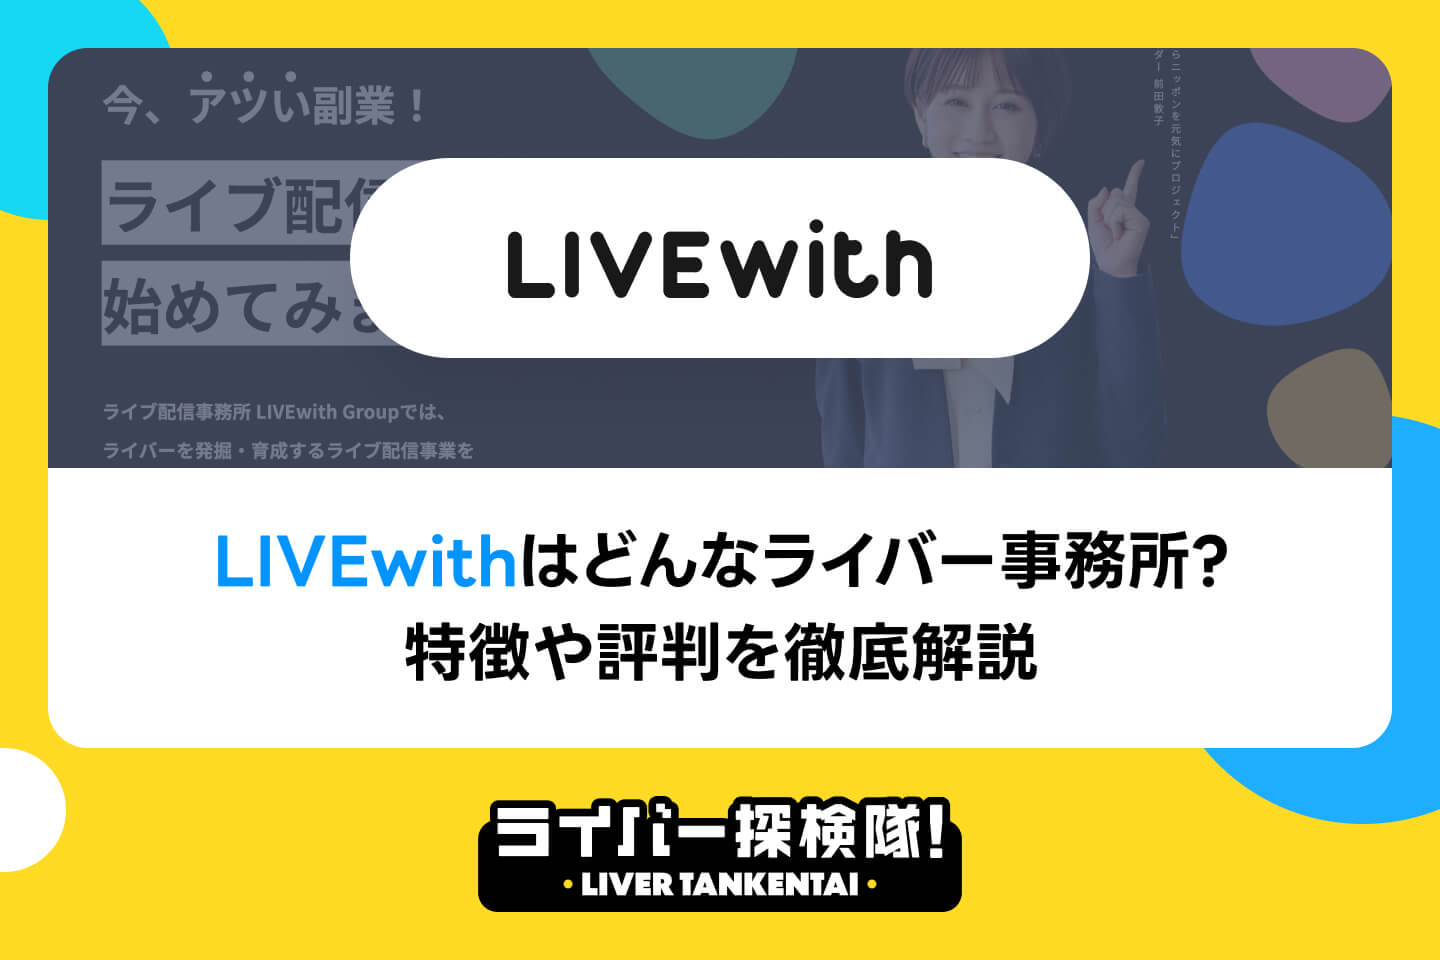 LIVE withはどんなライバー事務所？特徴や評判を徹底解説